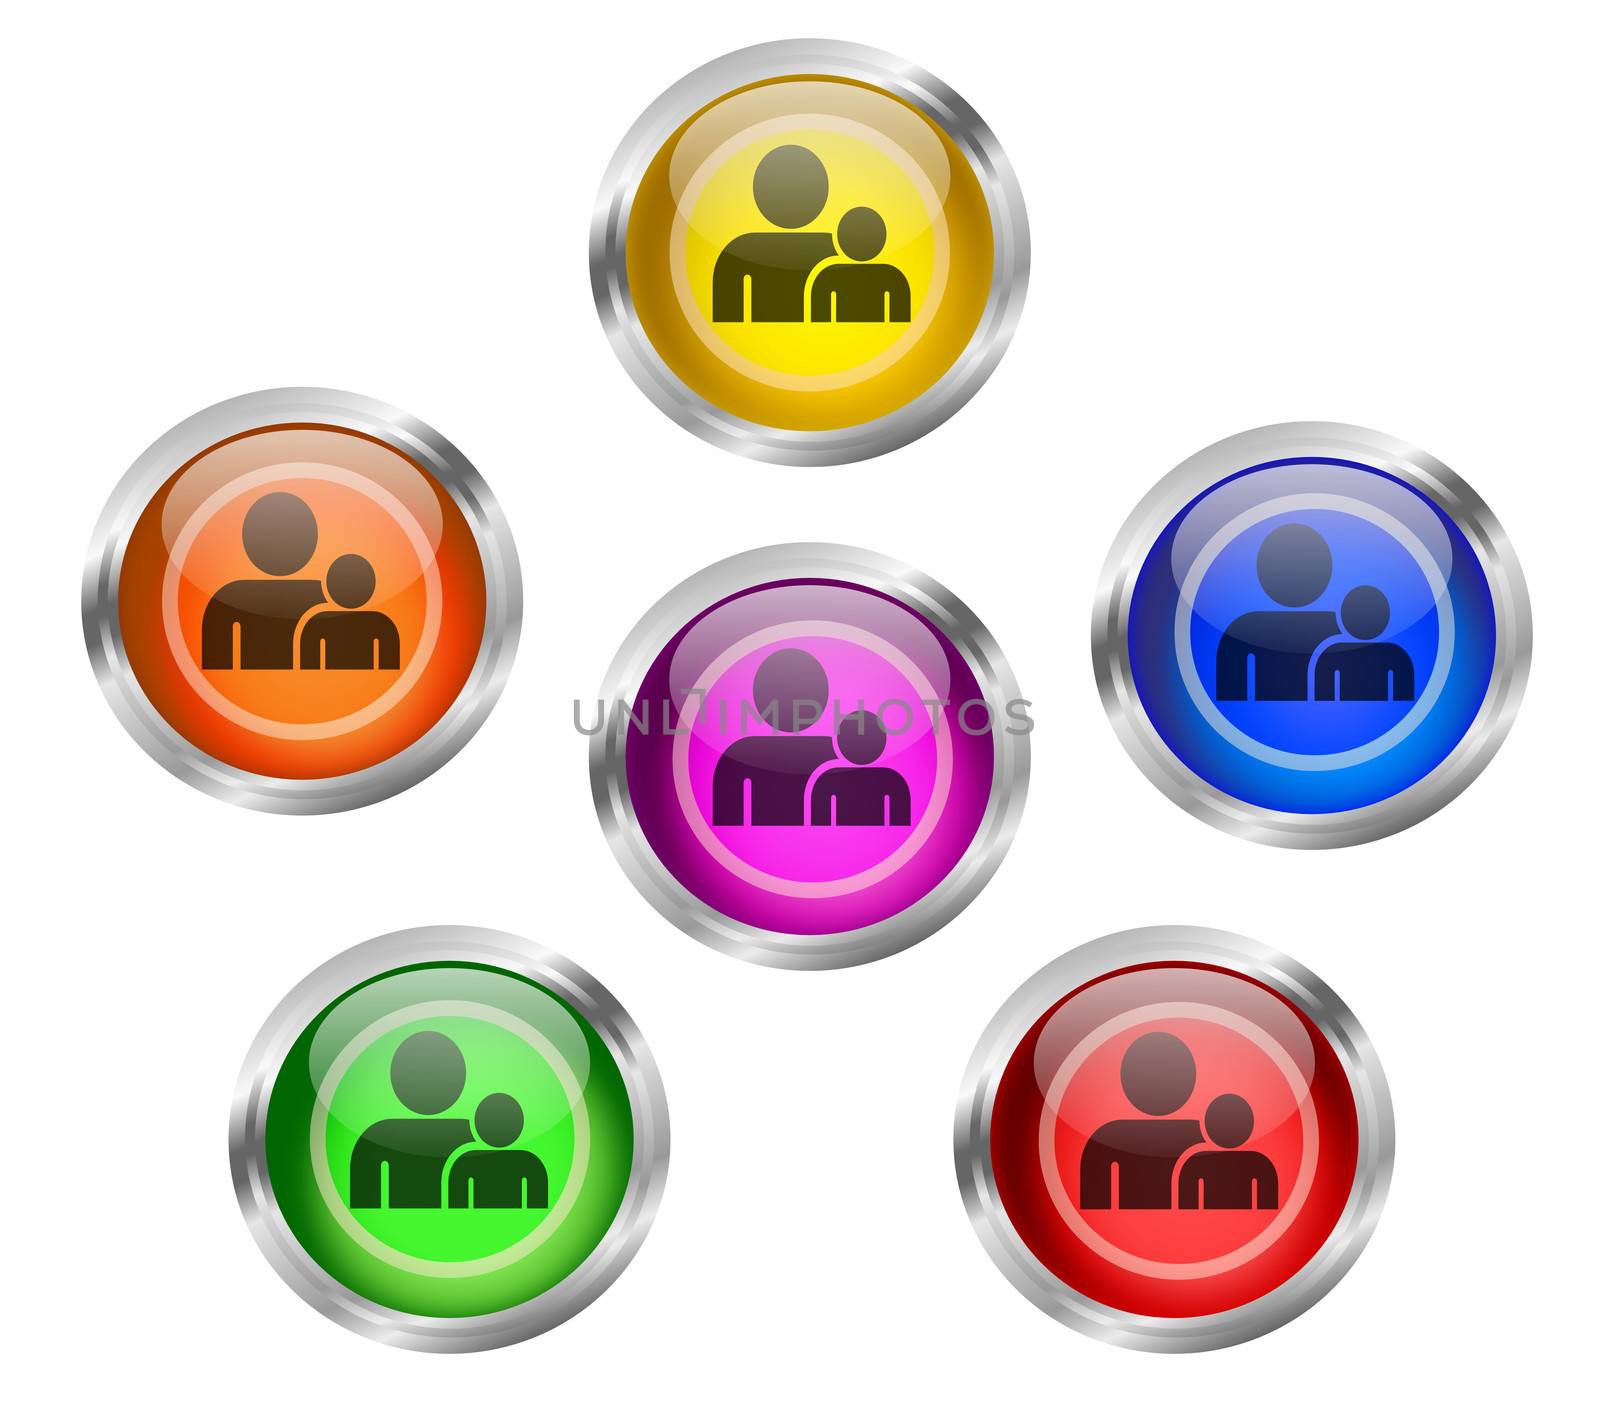 Employee People Buddy Icon Buttons by RichieThakur